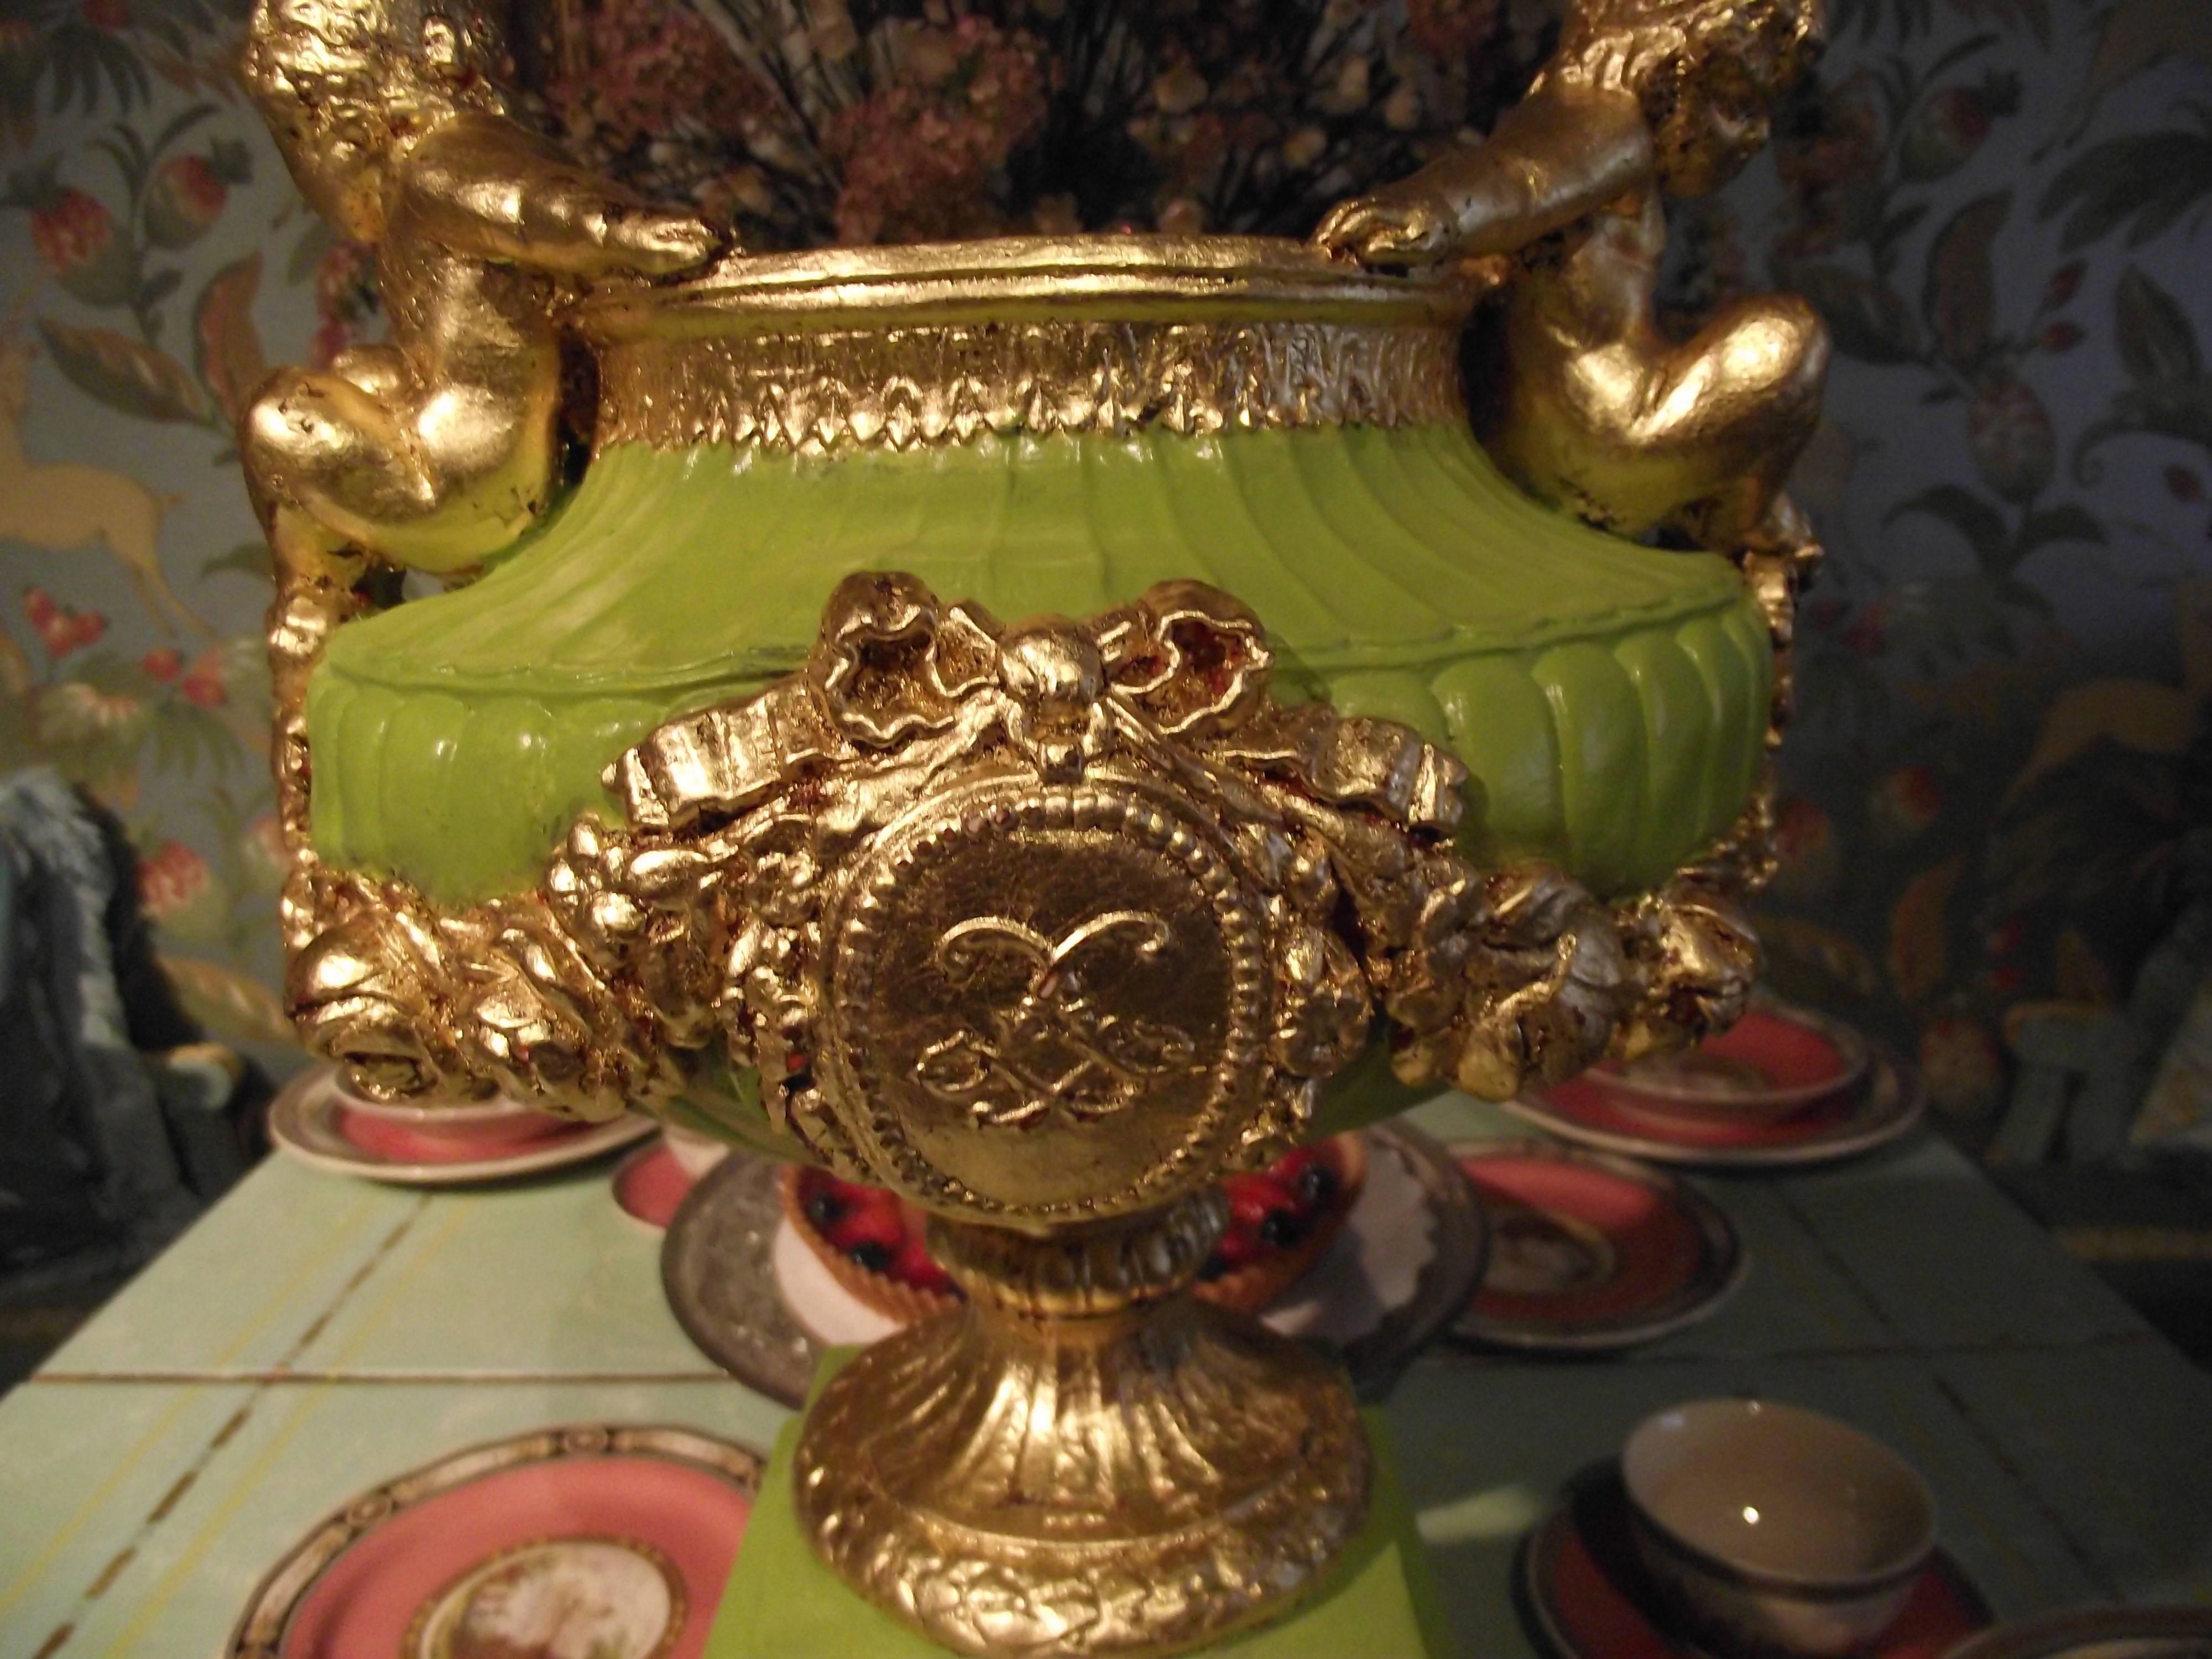 This striking urn has an original finish crafted in my studio. It was hand-painted and accented with hand applied gold foil leaf.

This plaster piece features a center medallion with floral swags coming together on each side at the feet of